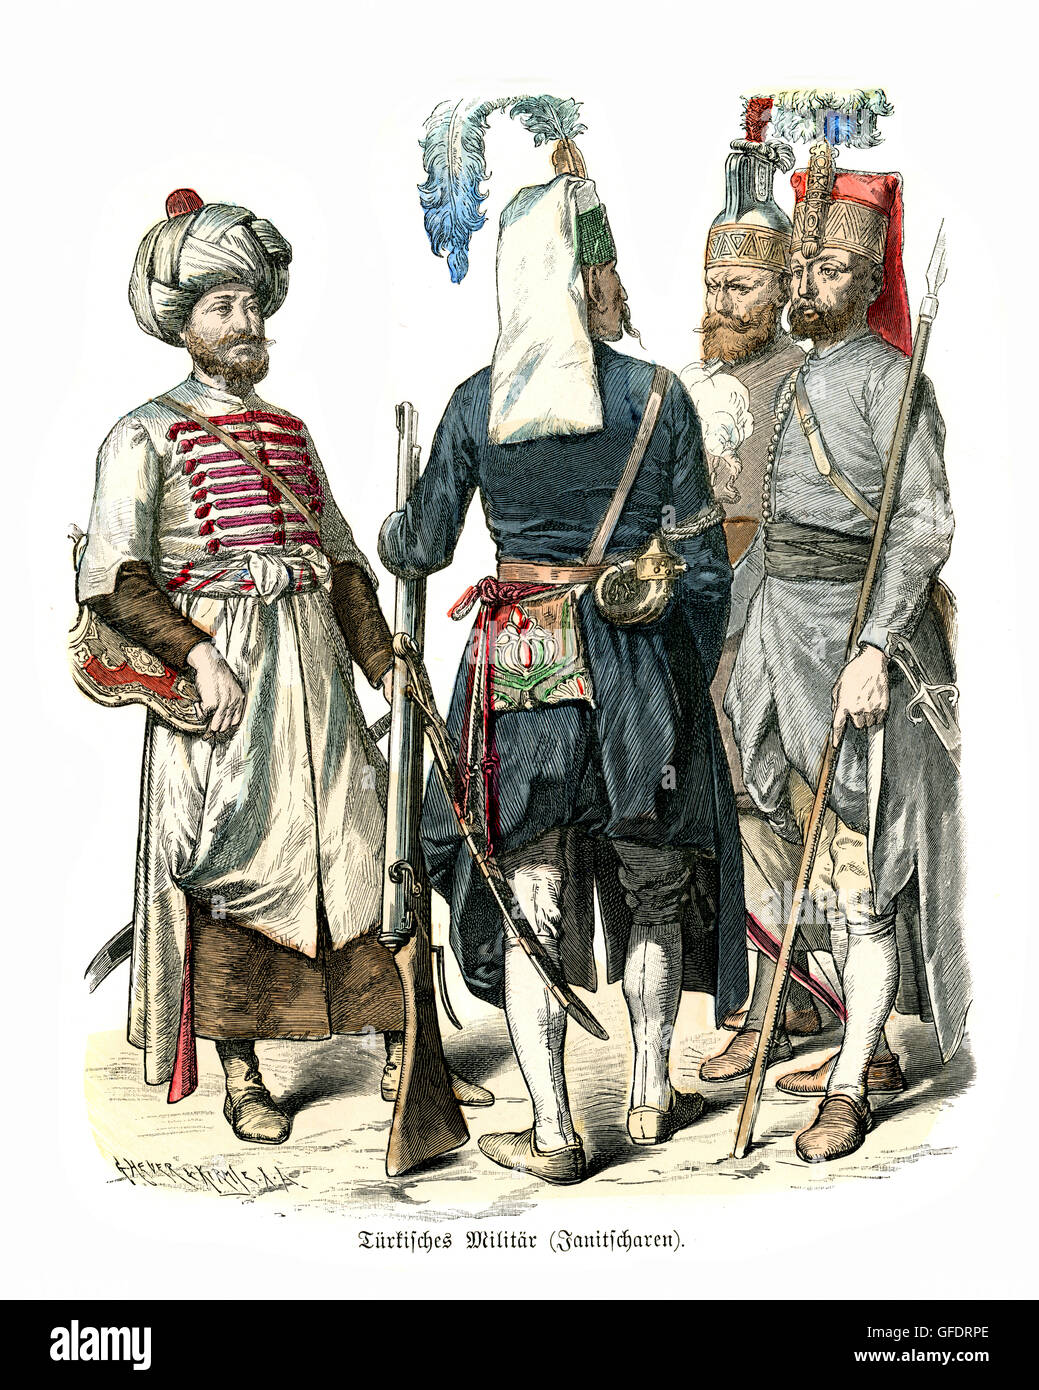 Military uniforms of Ottoman Turkey 17th and 18th Century. Janissaries  elite infantry units that formed the Ottoman Sultan's hou Stock Photo -  Alamy